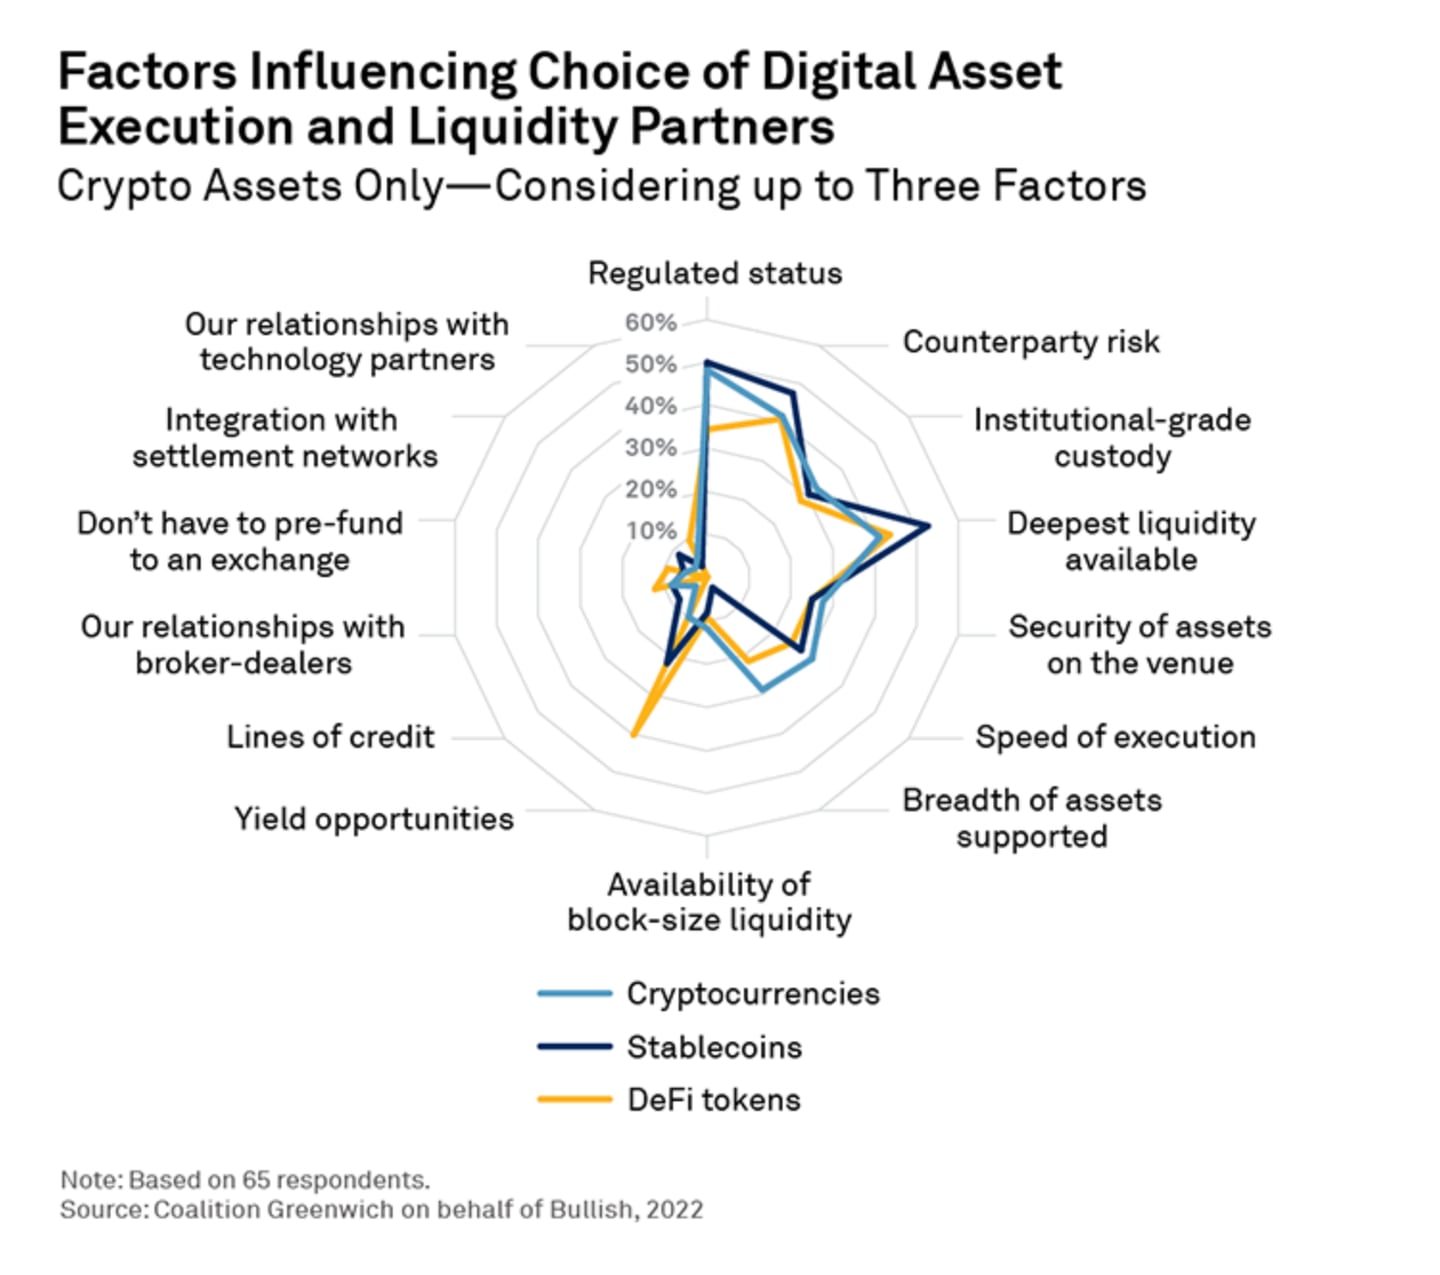 Coalition Greenwich Factors influencing choice of digital asset execution and liquidity partners
Crypto assets only — Considering up to three factors.